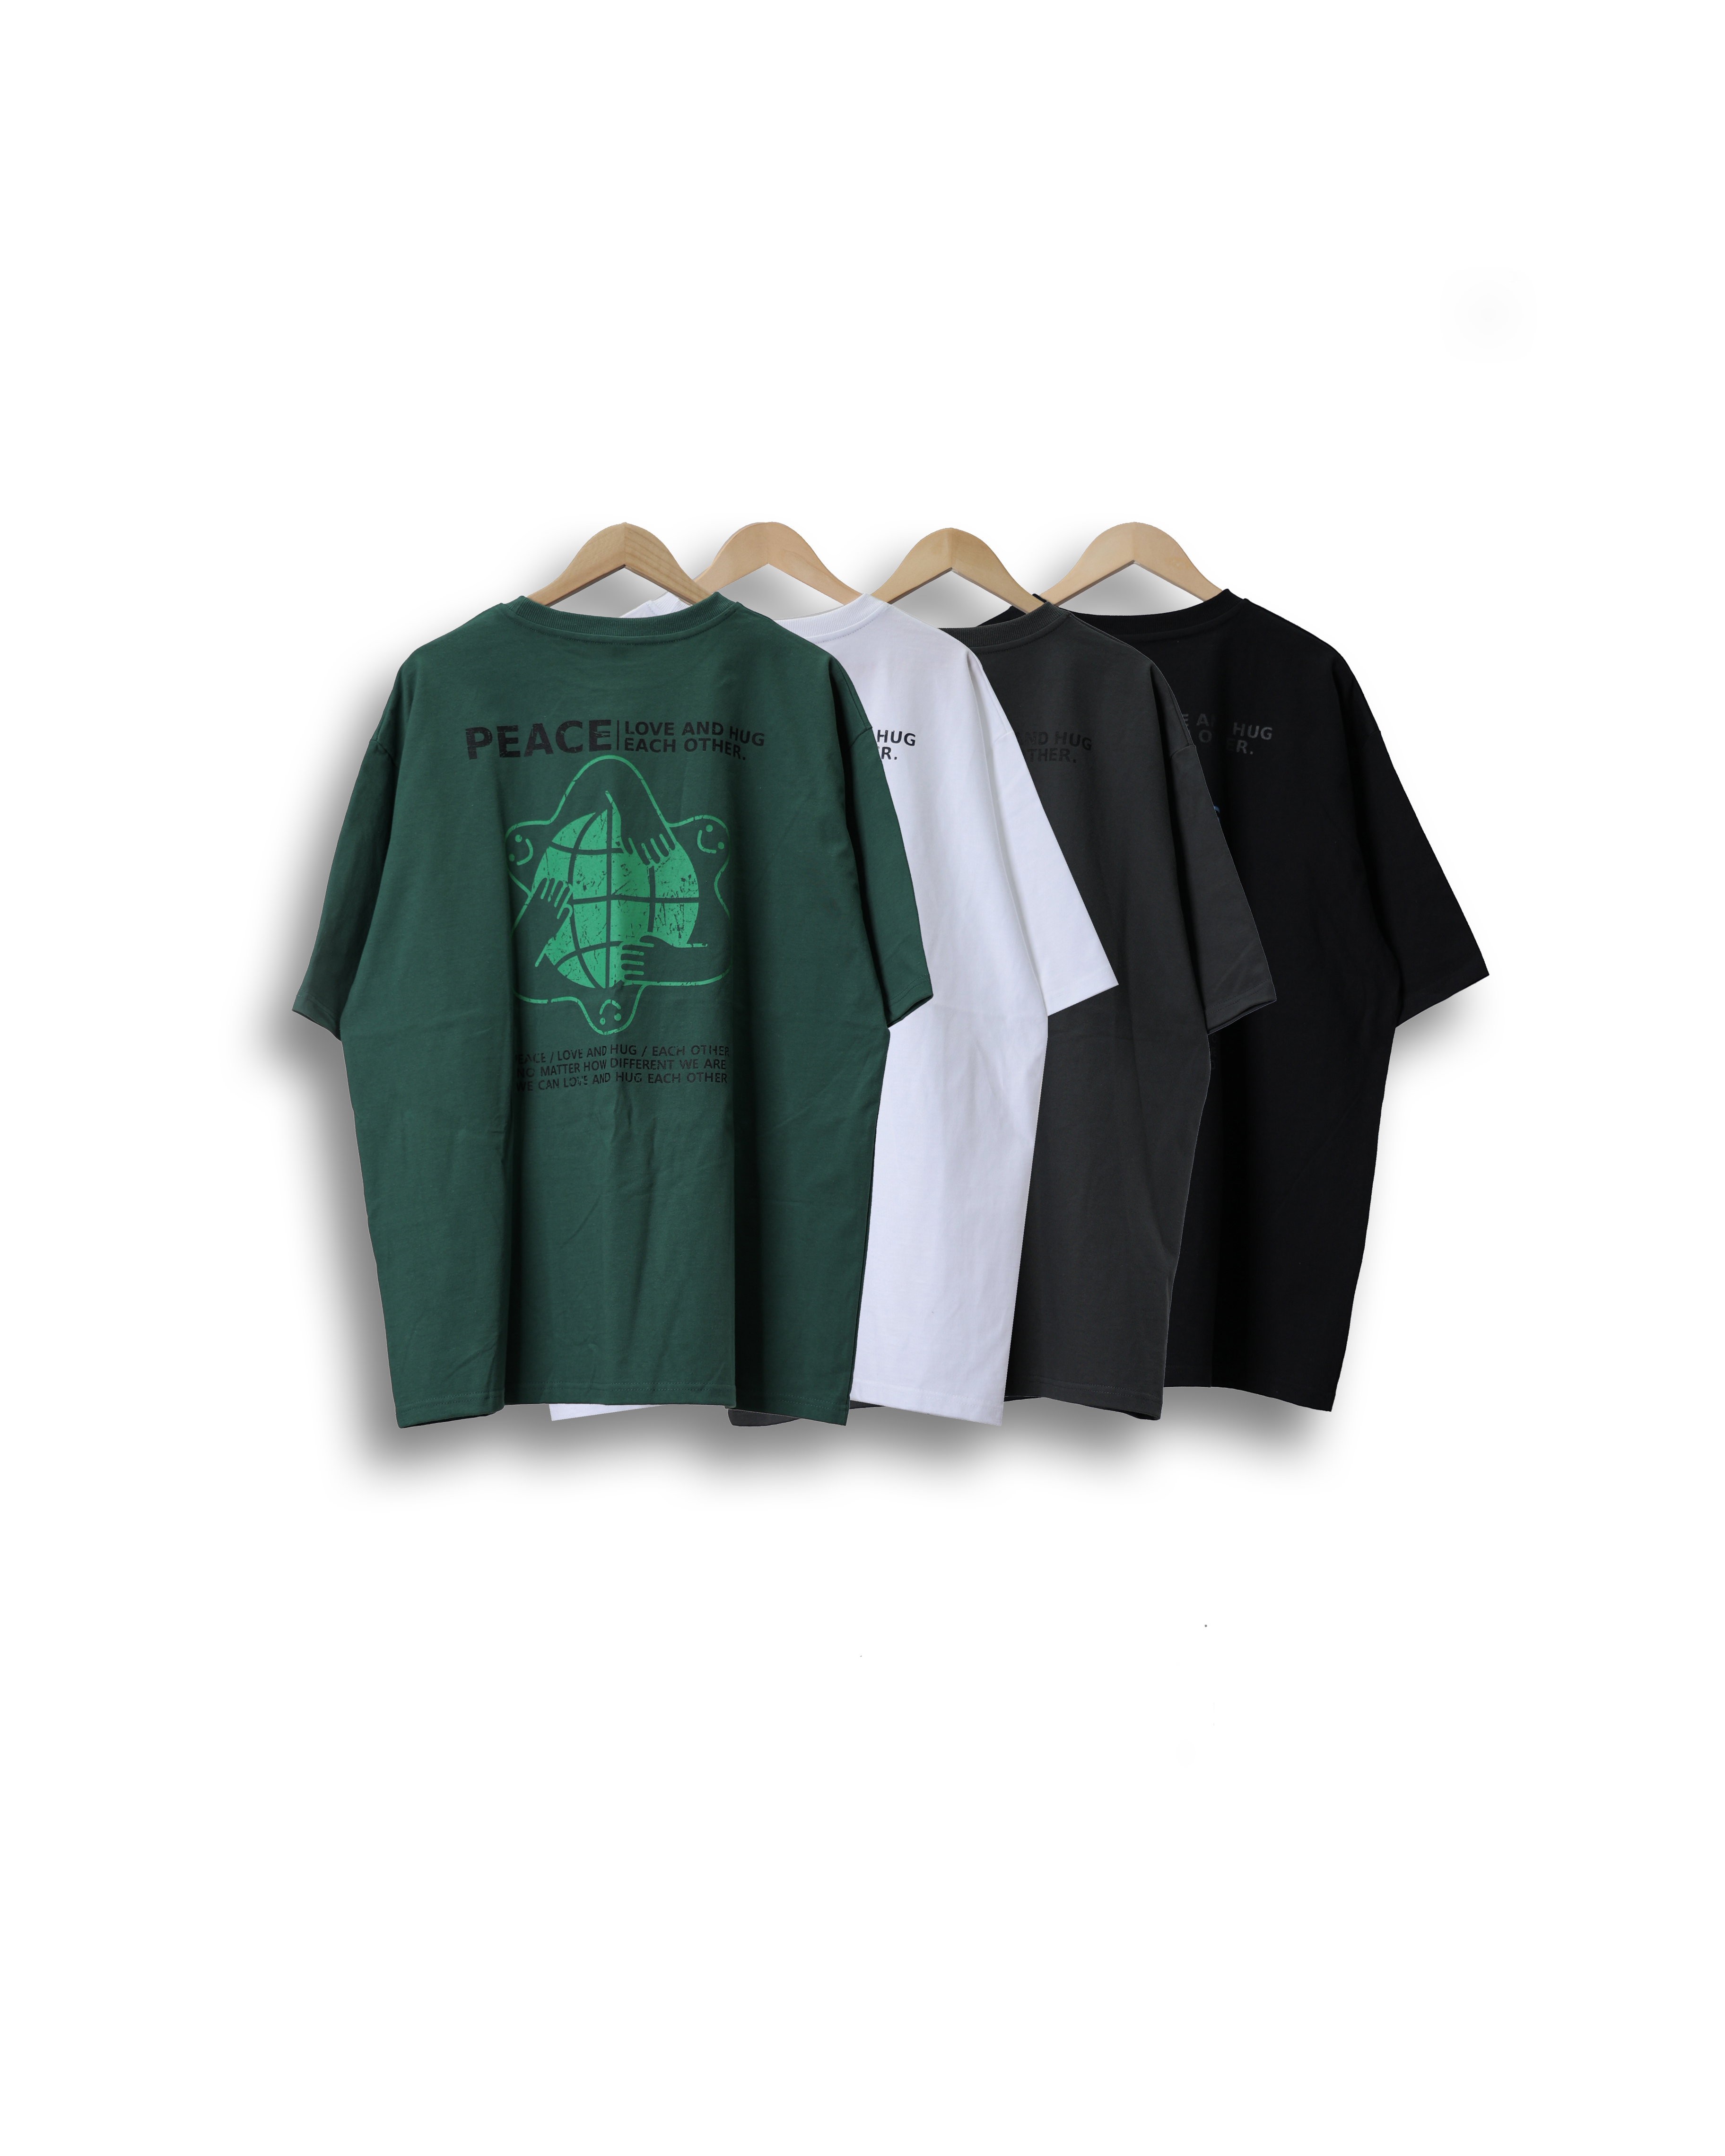 CONS PEACE Oversized Printed T Shirts (Black/Charcoal/Green/White)